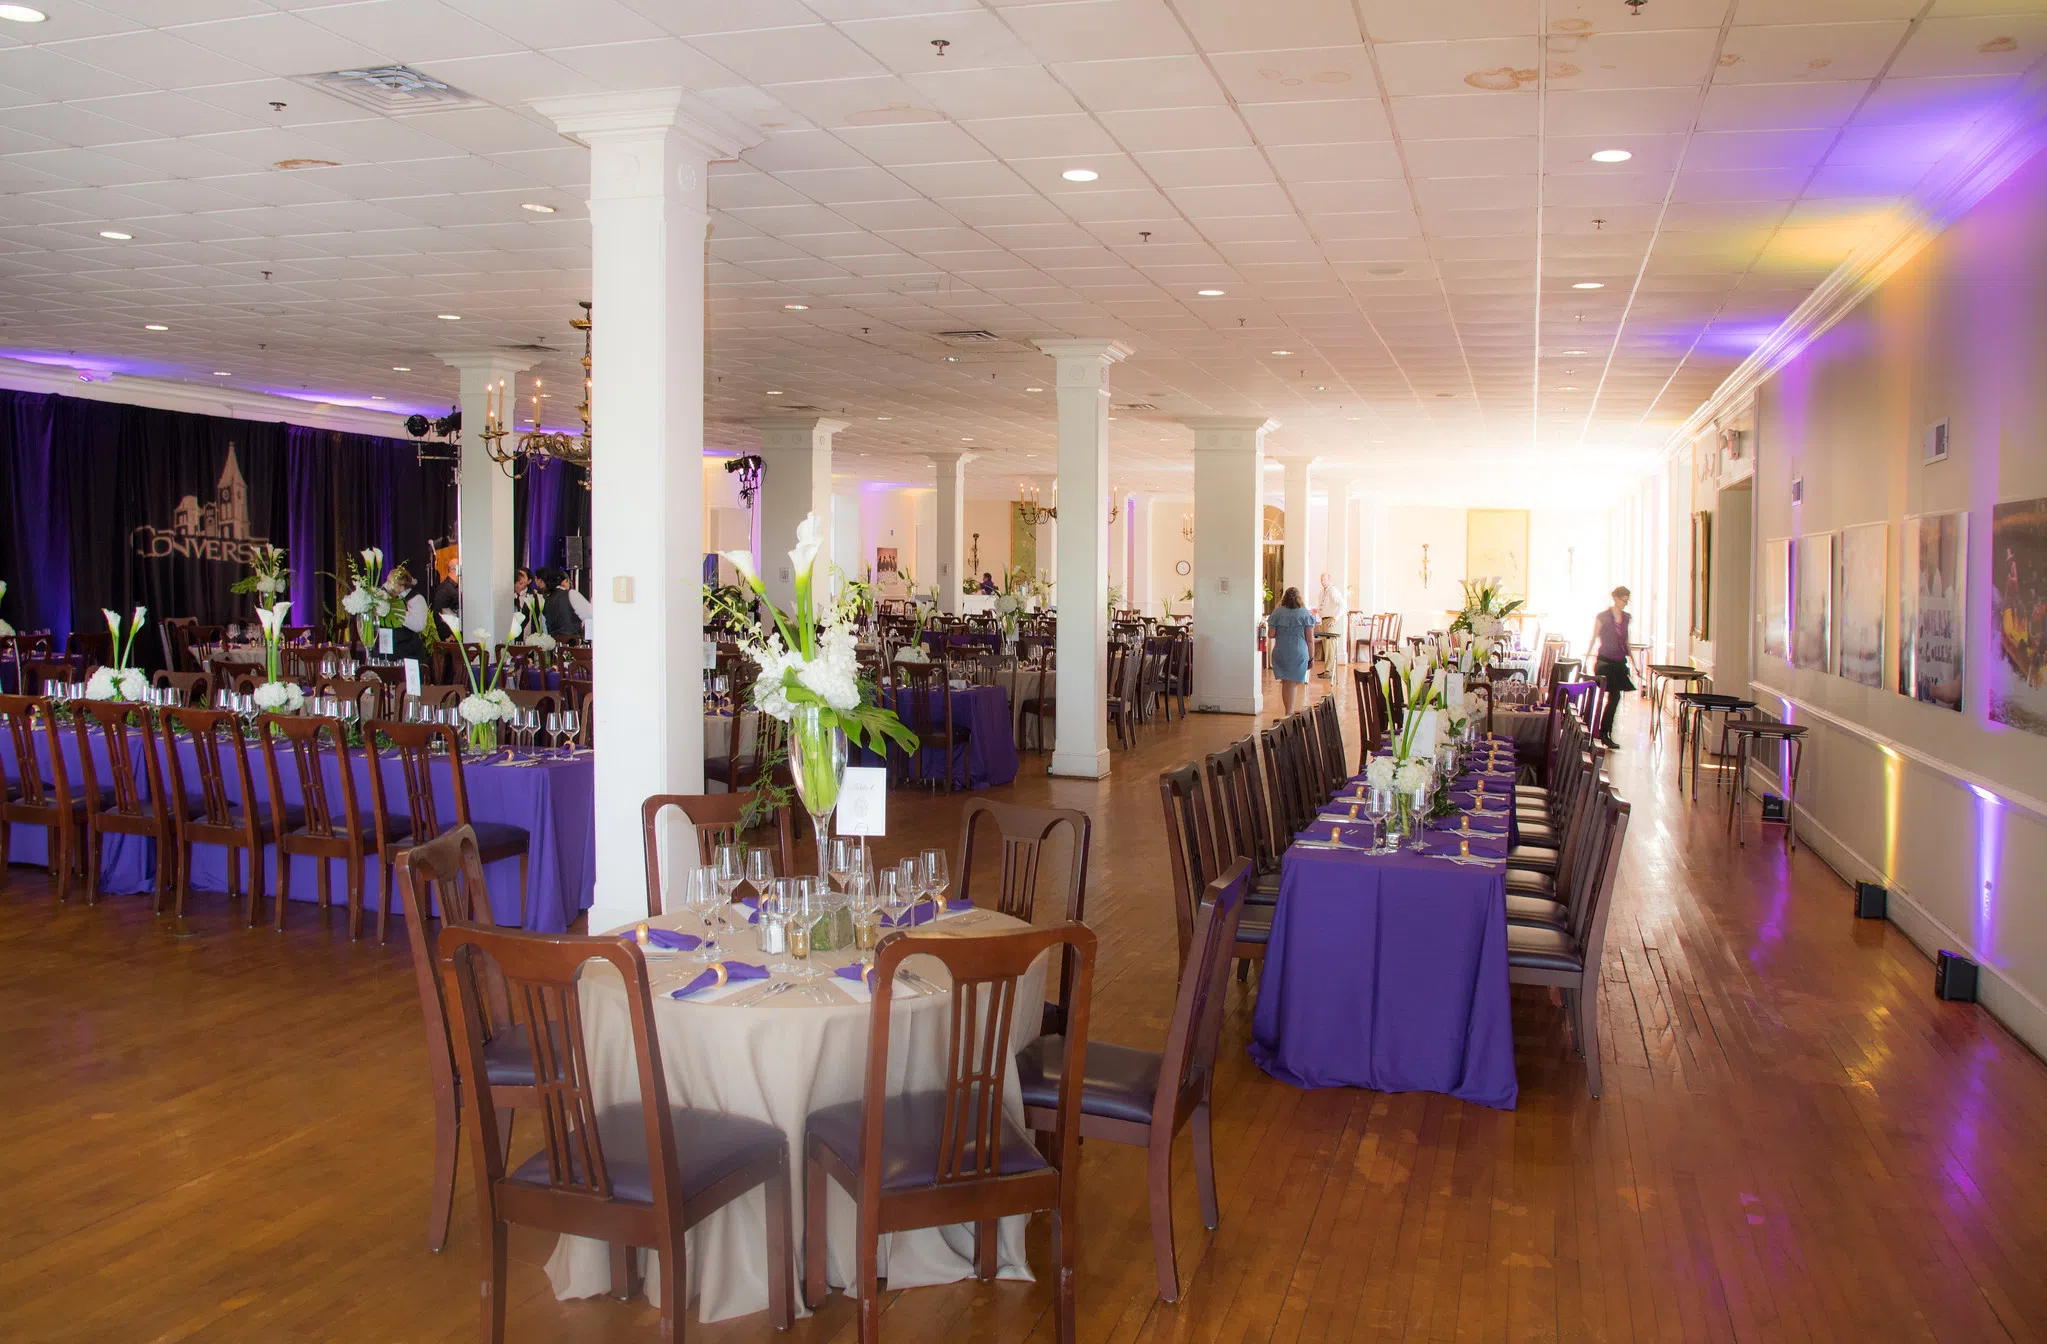 Purple and white draped tables with wooden chairs line a large dining room with white columns. The Converse logo can be seen on drapery in the background.